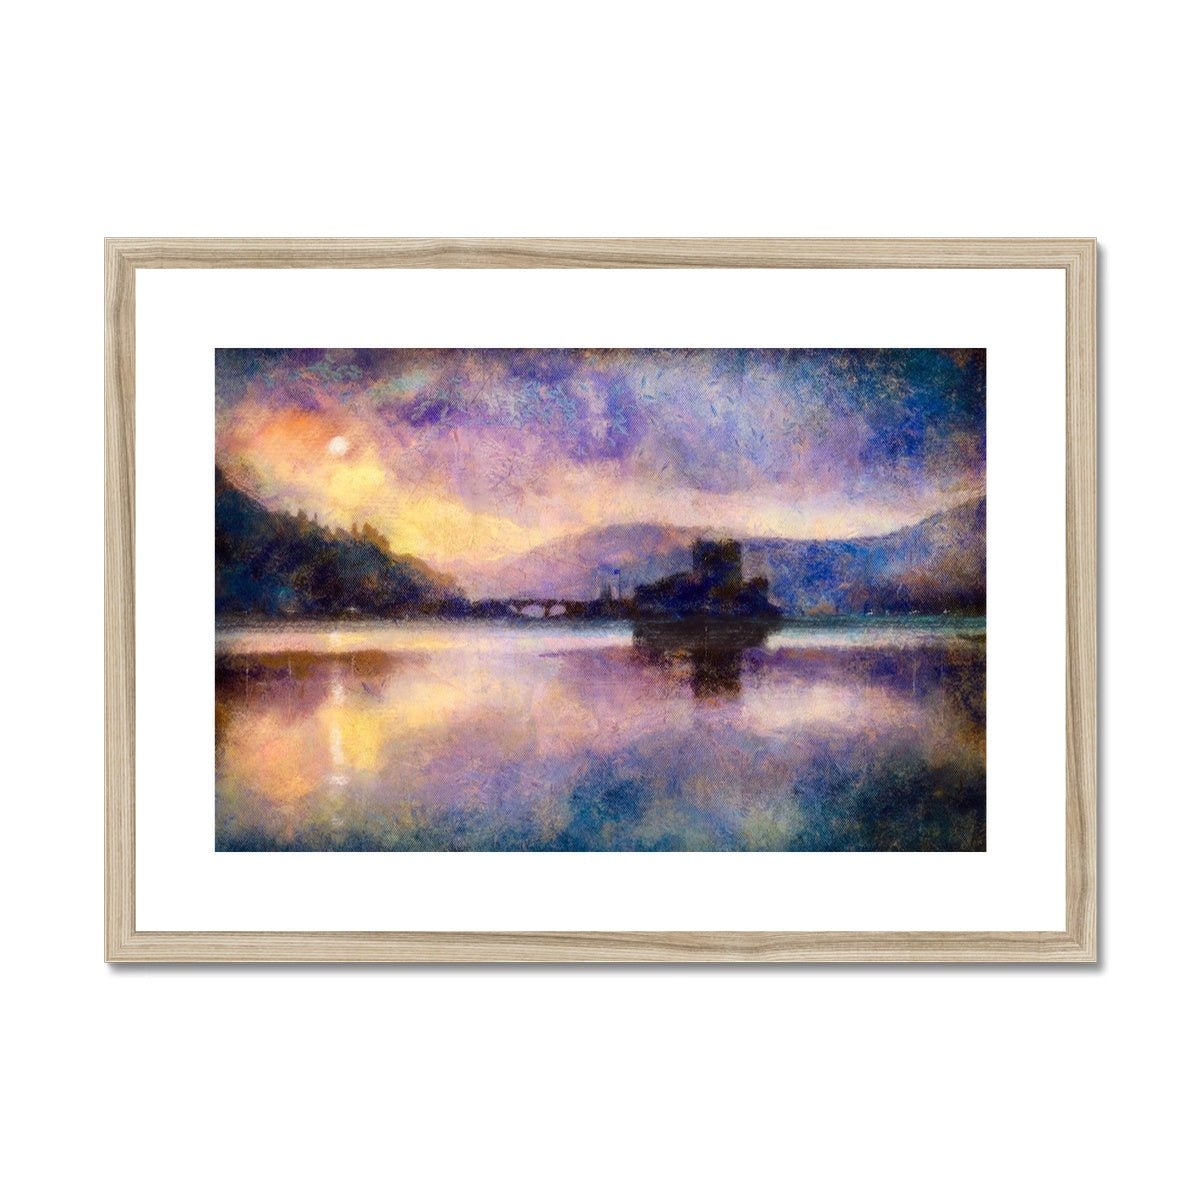 Eilean Donan Castle Moonlight Painting | Framed & Mounted Prints From Scotland-Framed & Mounted Prints-Historic & Iconic Scotland Art Gallery-A2 Landscape-Natural Frame-Paintings, Prints, Homeware, Art Gifts From Scotland By Scottish Artist Kevin Hunter